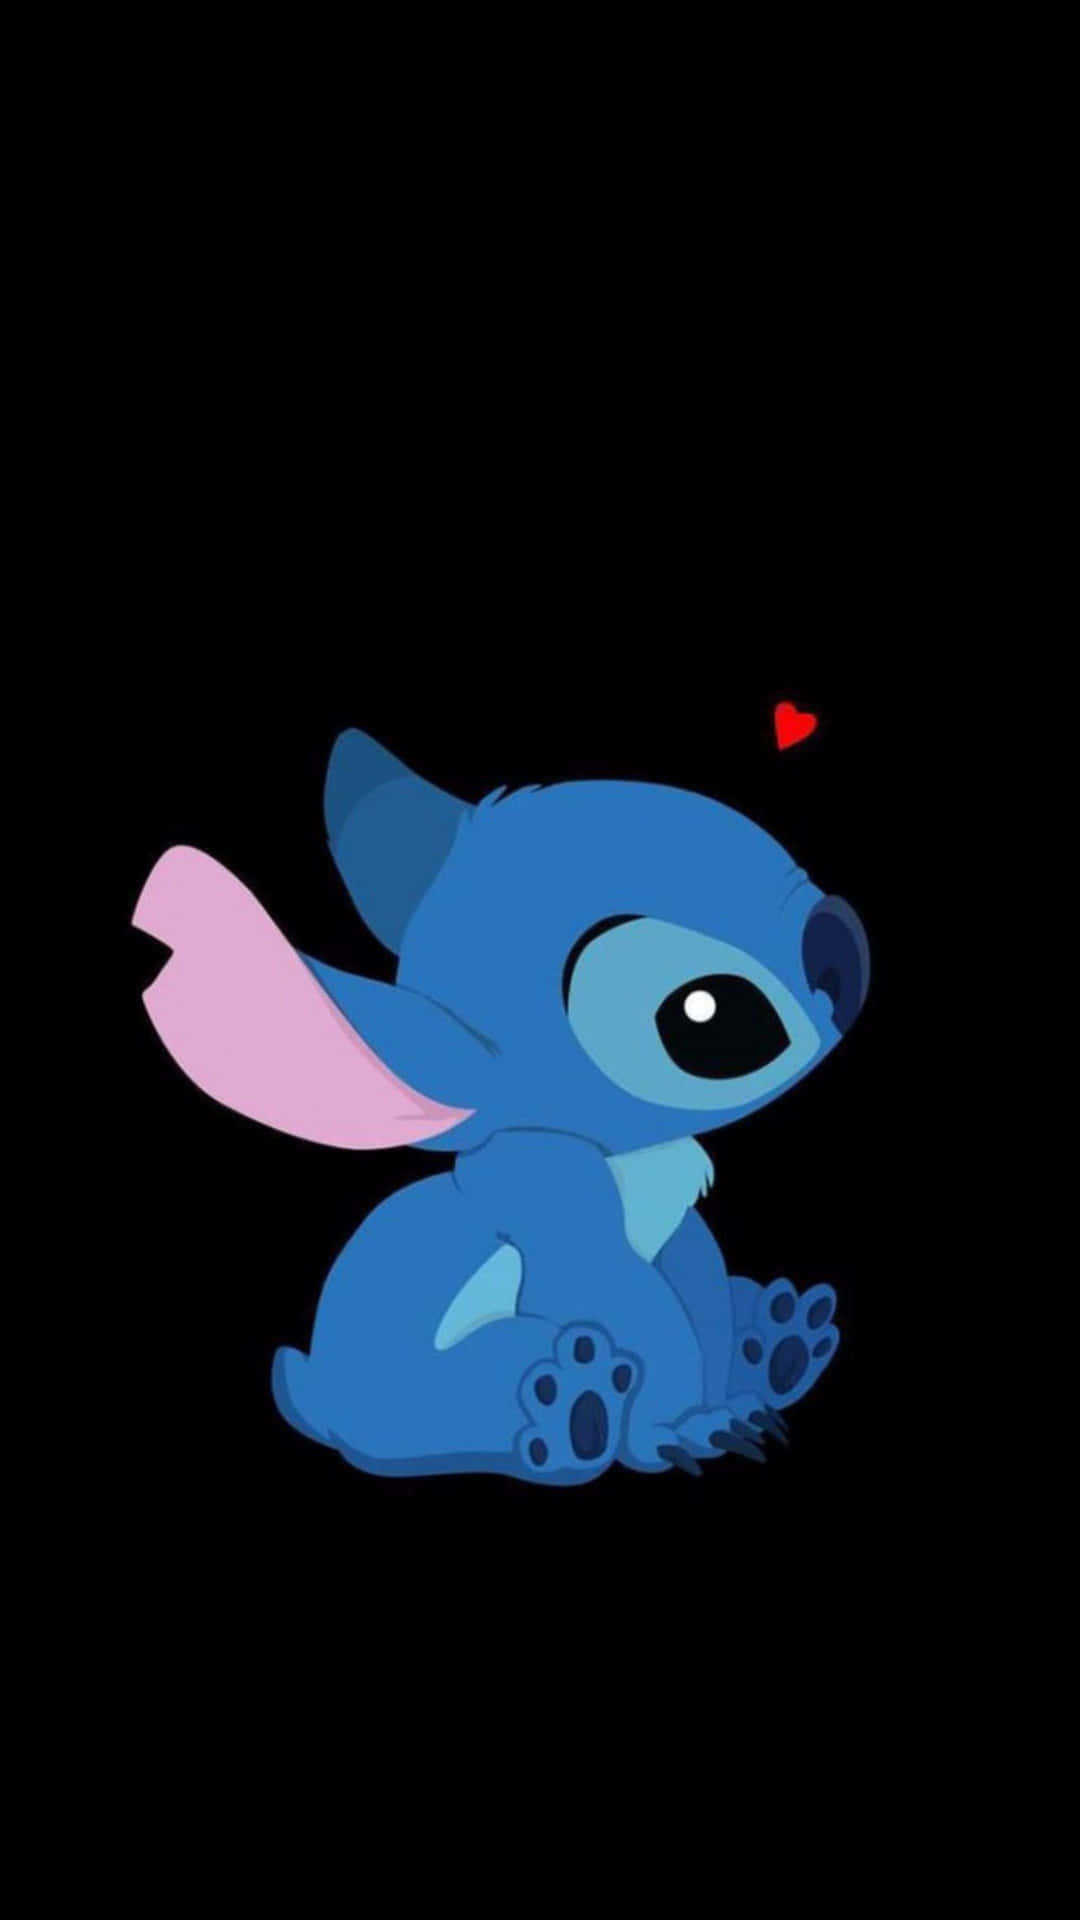 Adorable Blue Stitchwith Heart Wallpaper